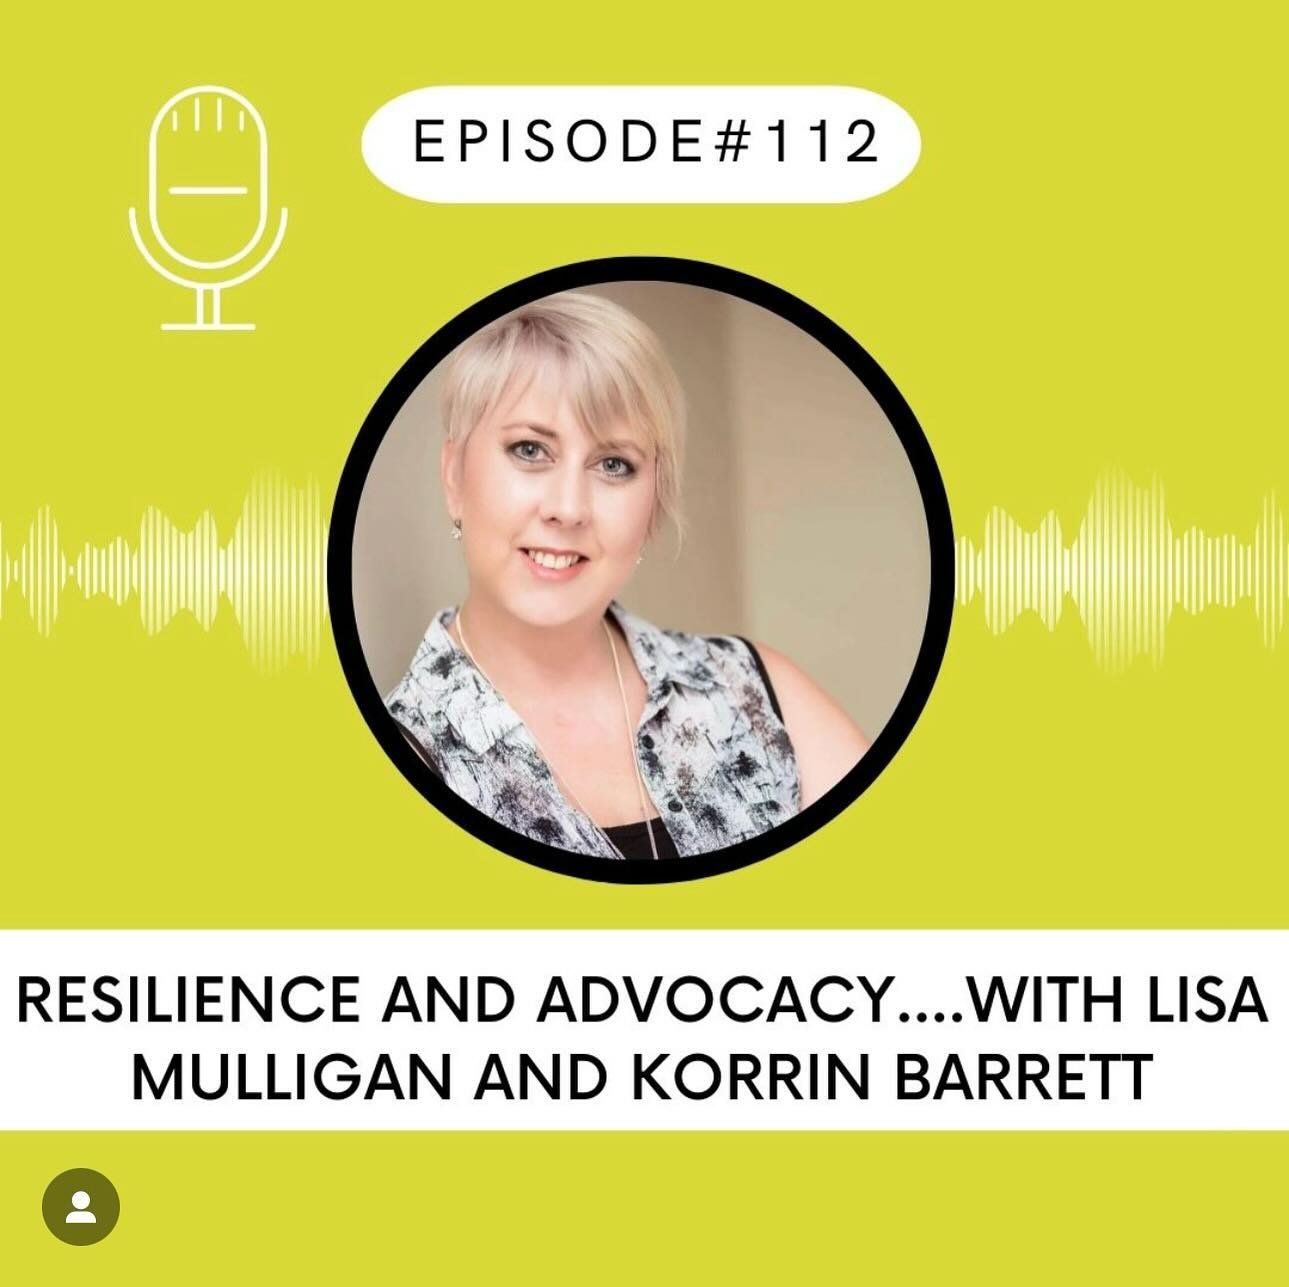 Recently I shared my story with the beautiful @lisamulligan for her A Dog Called Diversity podcast. You can listen to it on the link below.

https://podcasts.apple.com/nz/podcast/resilience-and-advocacy-with-korrin-barrett/id1547428736?i=100063636538